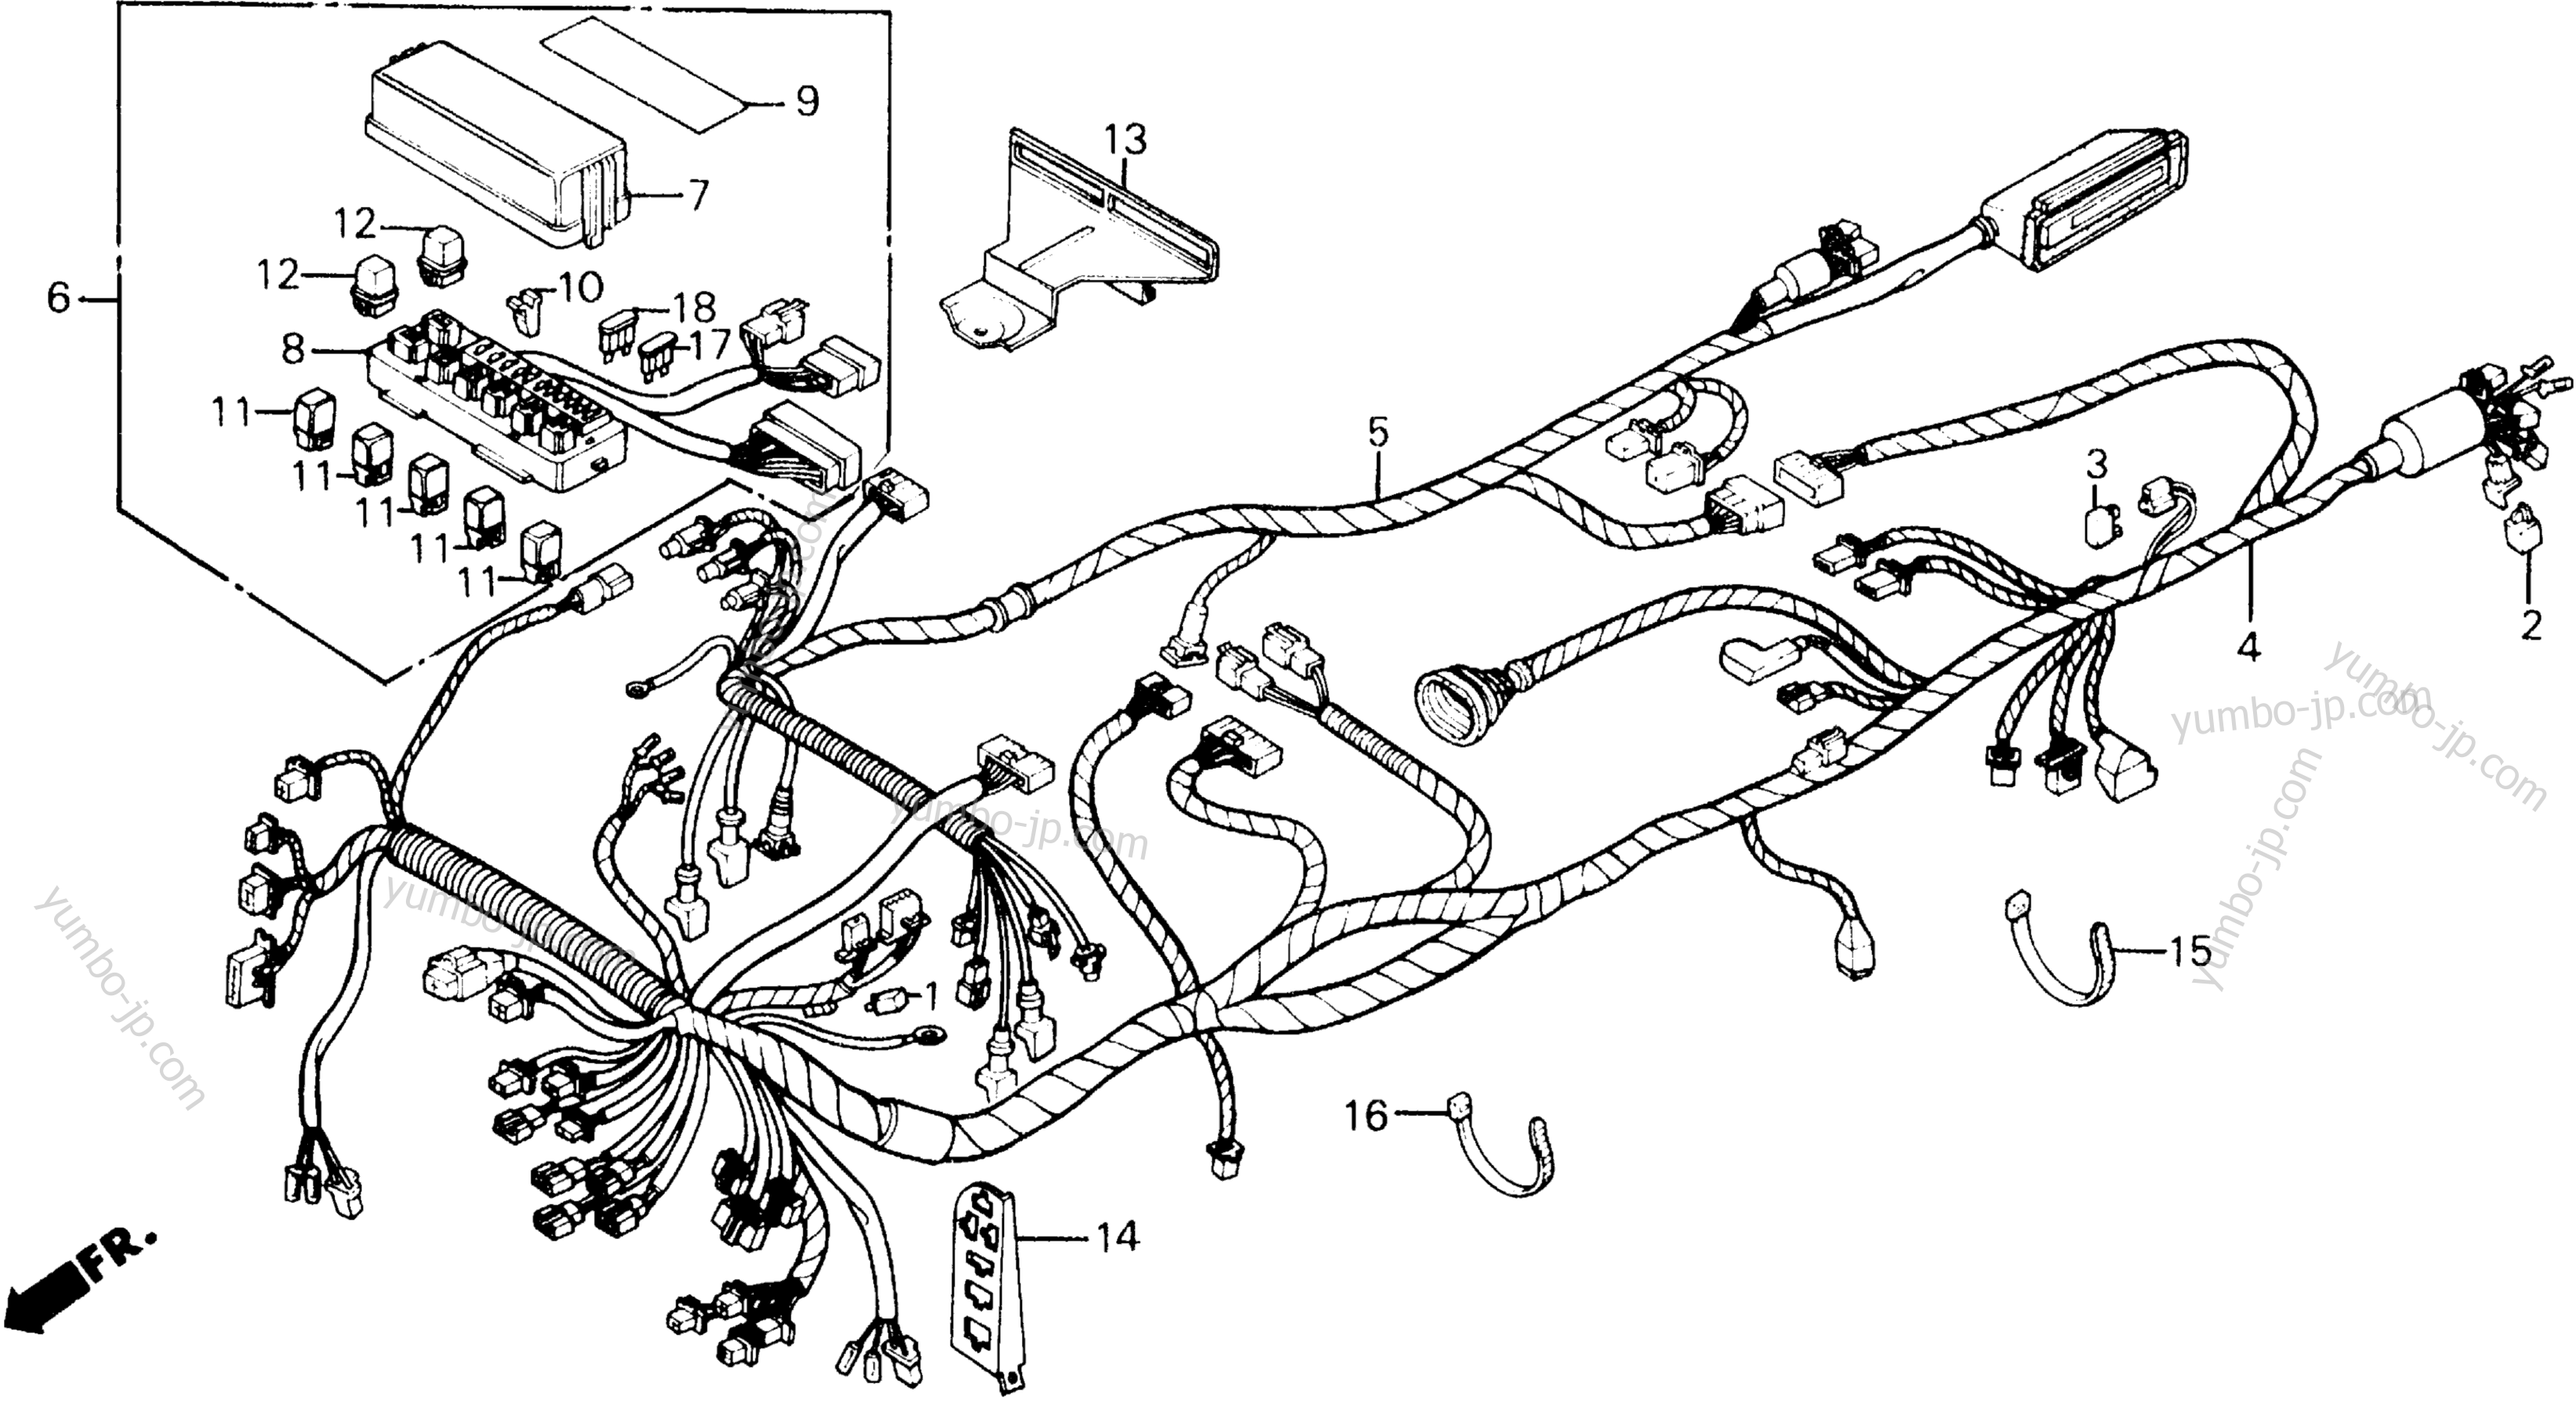 WIRE HARNESS for motorcycles HONDA GL1200SEI A 1986 year